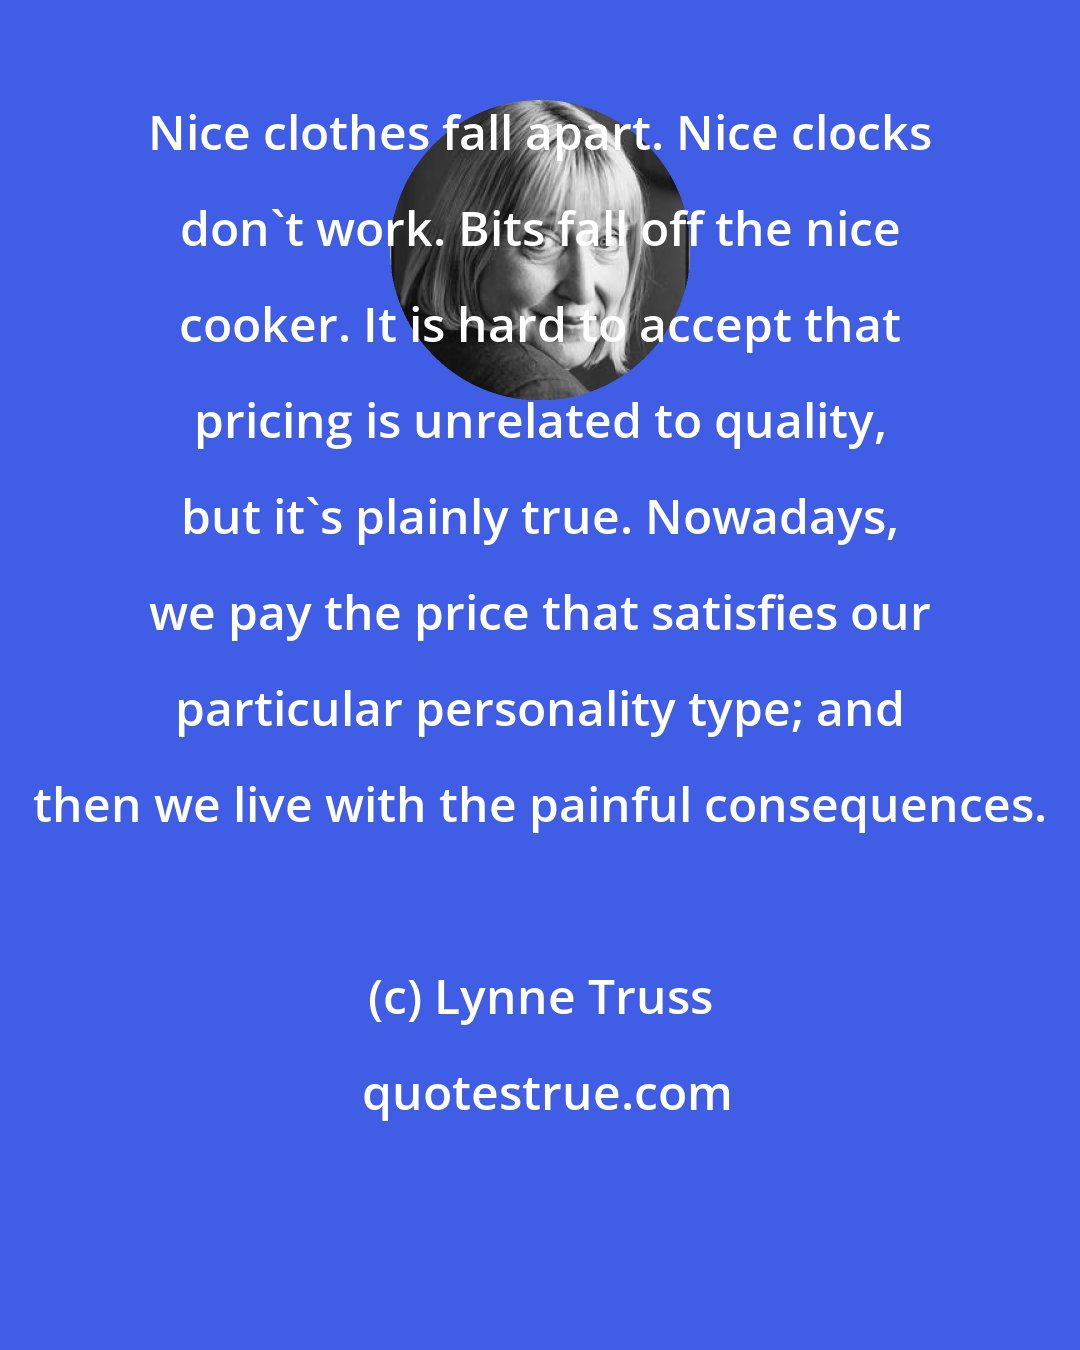 Lynne Truss: Nice clothes fall apart. Nice clocks don't work. Bits fall off the nice cooker. It is hard to accept that pricing is unrelated to quality, but it's plainly true. Nowadays, we pay the price that satisfies our particular personality type; and then we live with the painful consequences.